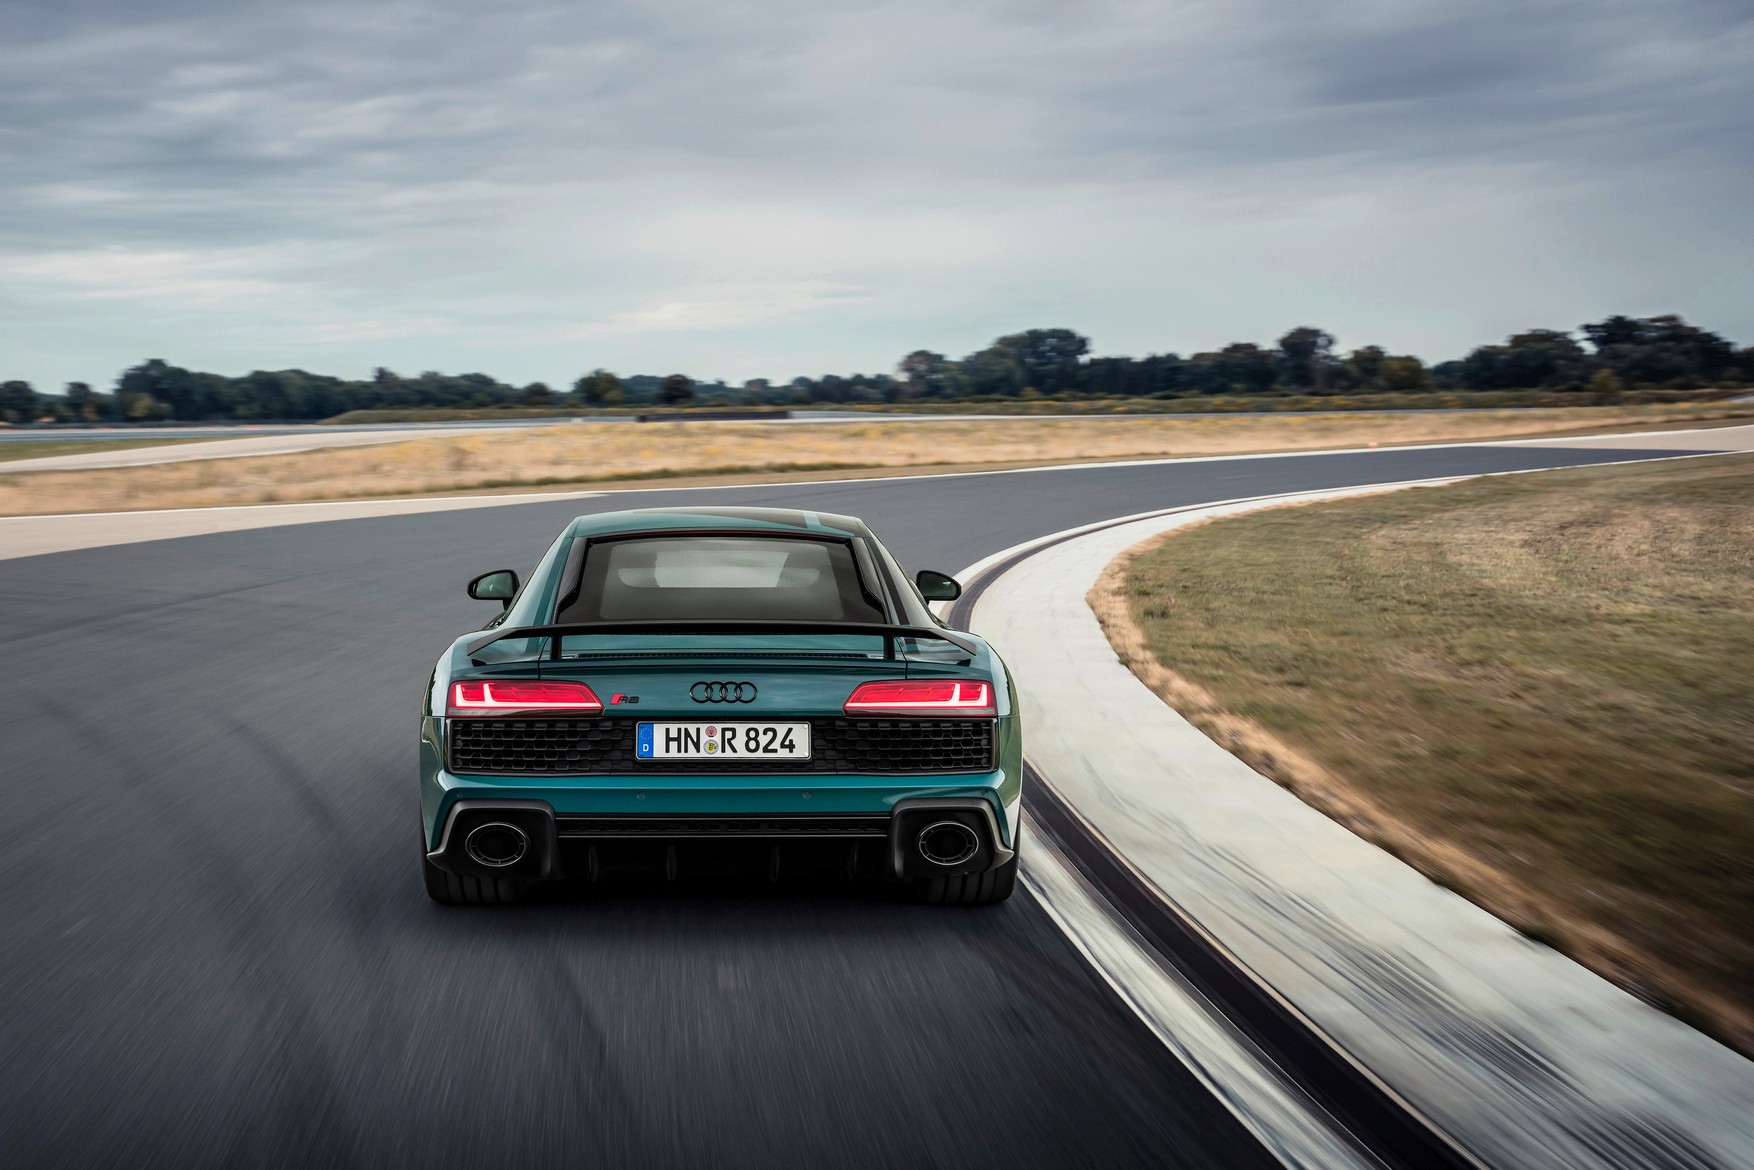 New Audi R8 reportedly coming in 2023 ...